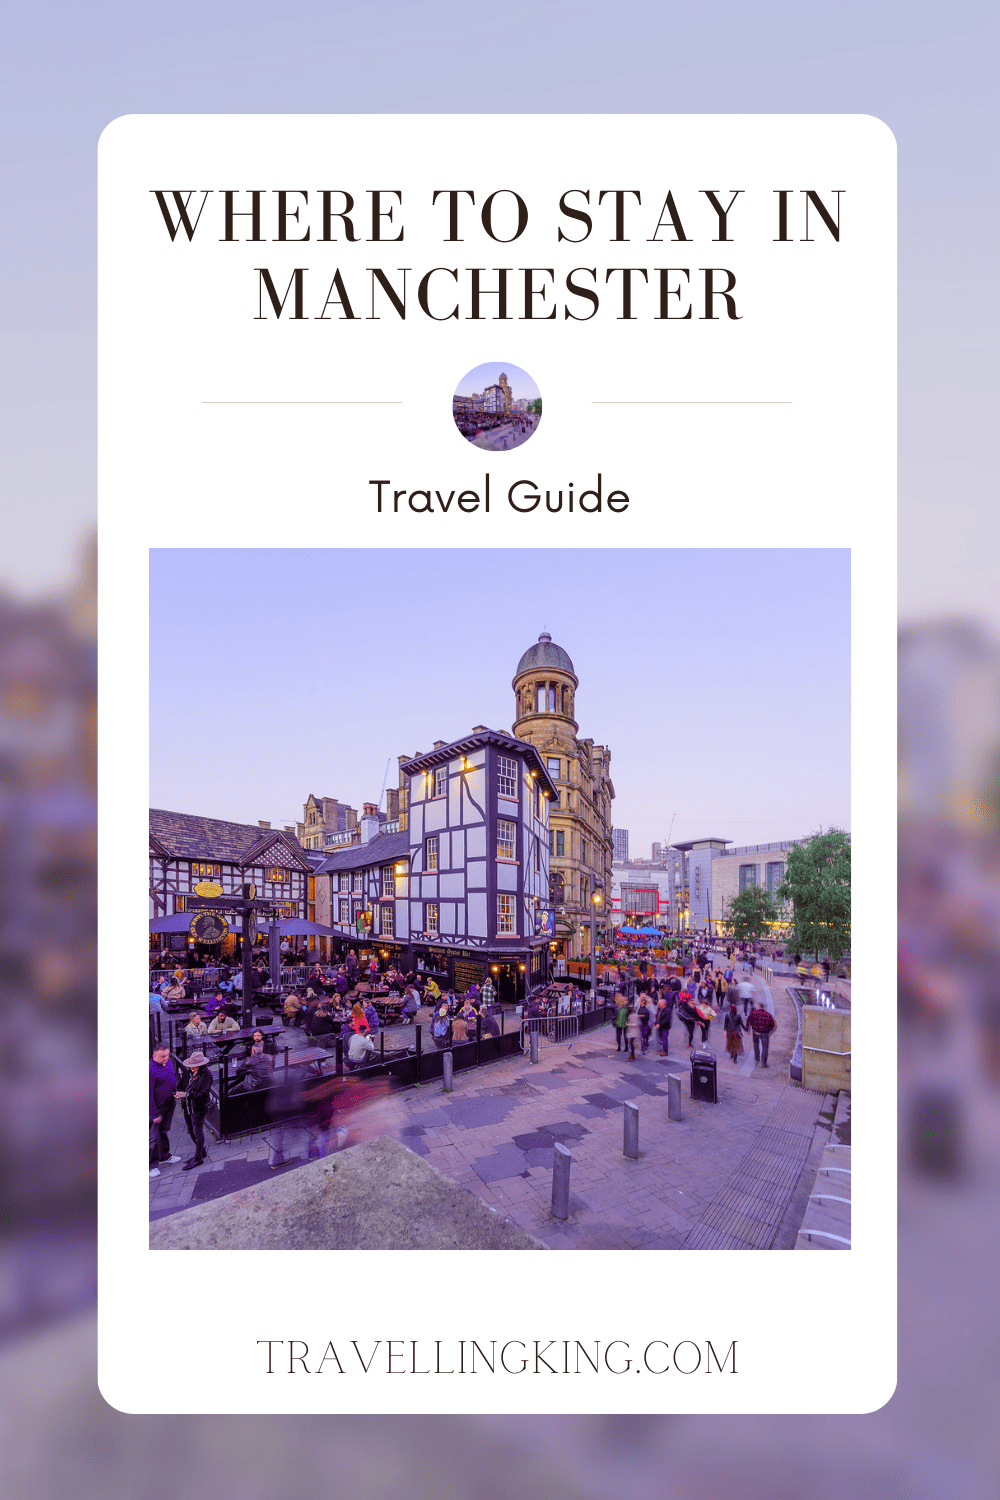 Where to stay in Manchester